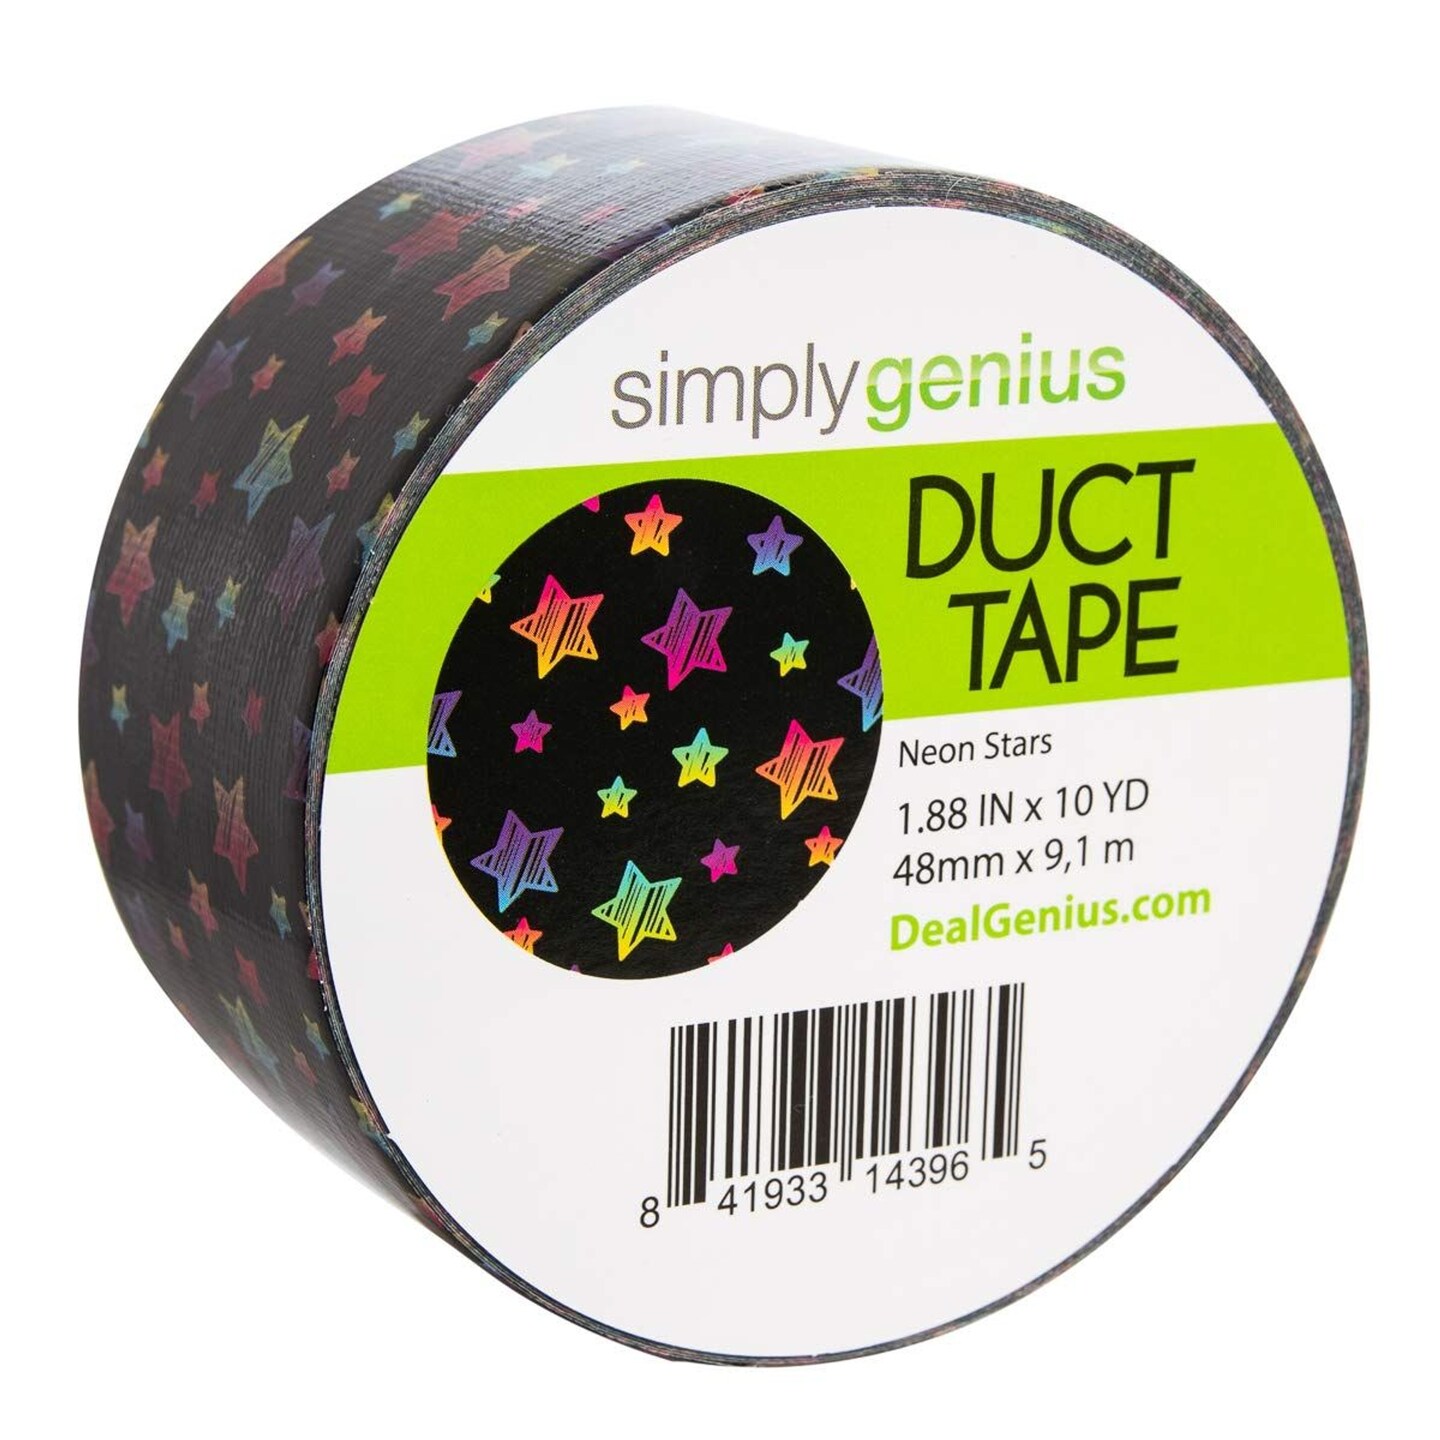 Simply Genius Pattern Duct Tape Heavy Duty - Craft Supplies for Kids &#x26; Adults - Colored Duct Tape - Single Roll 1.8 in x 10 yards - Colorful Tape for DIY, Craft &#x26; Home Improvement (Neon Stars)